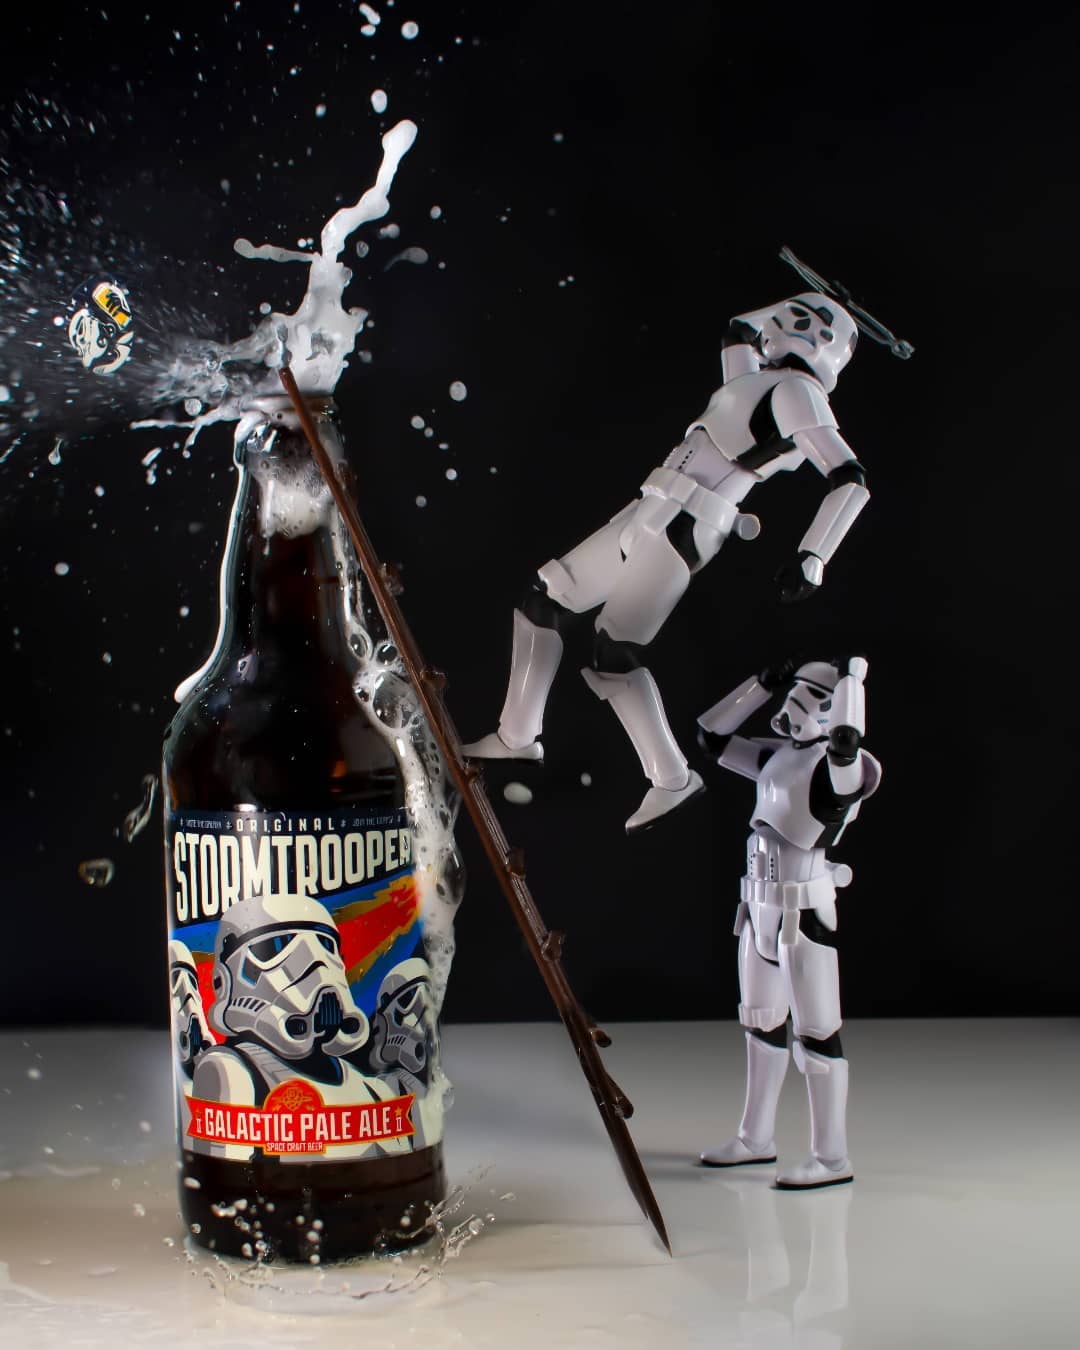 Action Shots Of Pop Culture Characters With Drinks By Andrea (5)